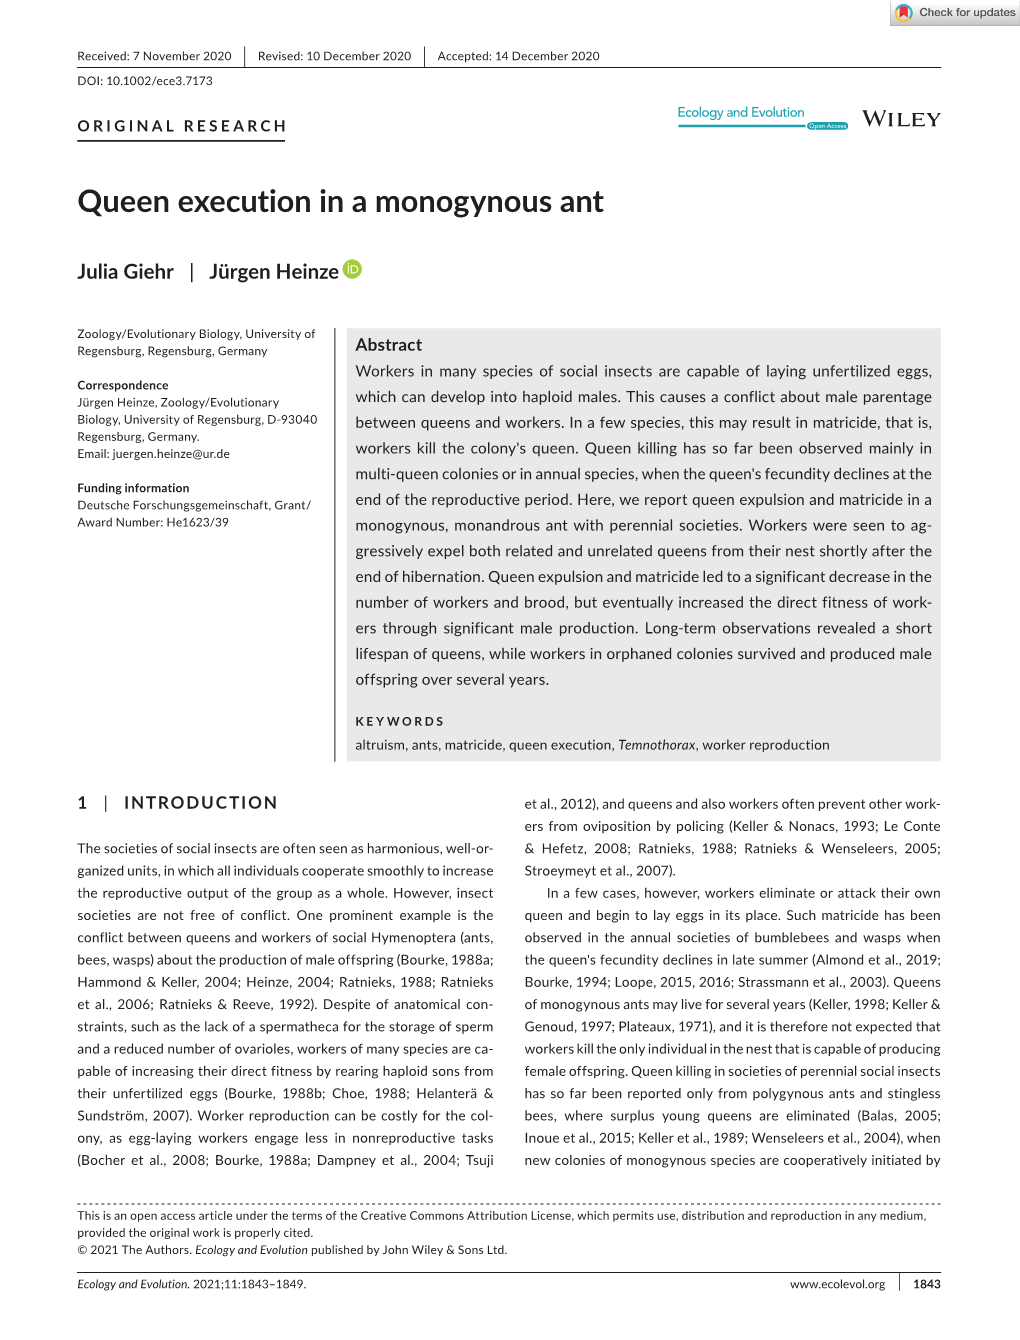 Queen Execution in a Monogynous Ant